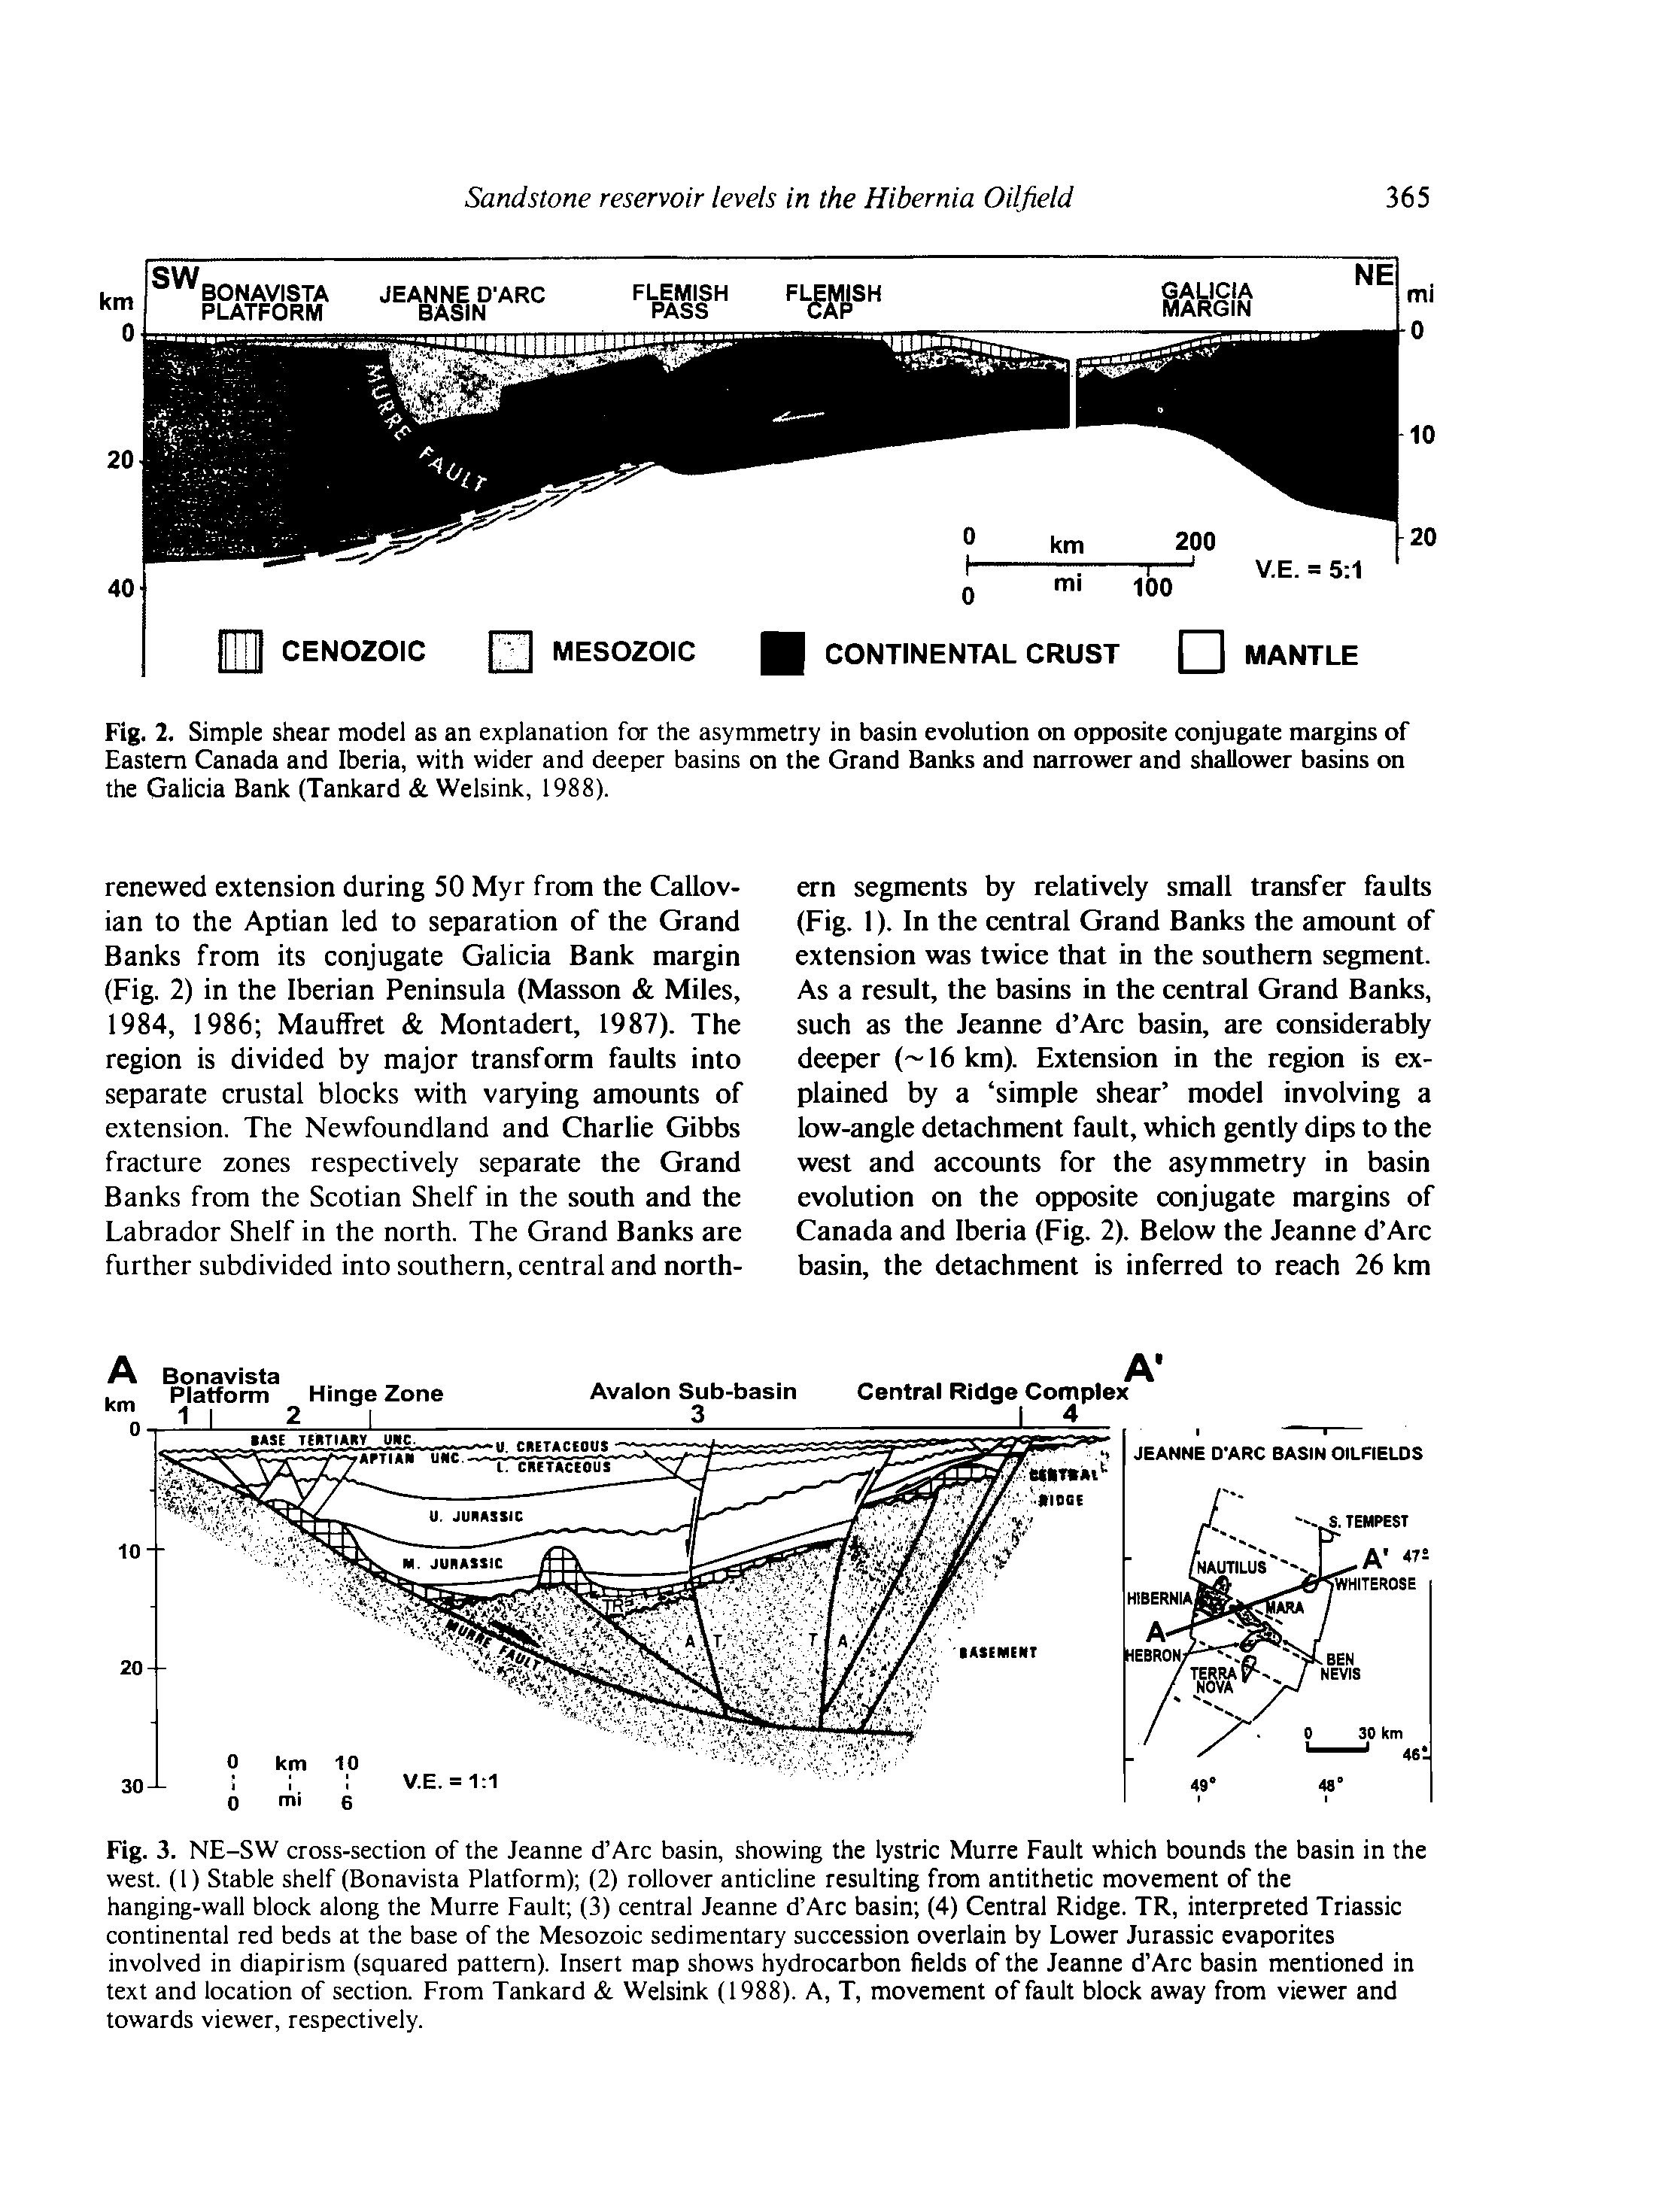 Fig. 3. NE-SW cross-section of the Jeanne d Arc basin, showing the lystric Murre Fault which bounds the basin in the west. (1) Stable shelf (Bonavista Platform) (2) rollover anticline resulting from antithetic movement of the hanging-wall block along the Murre Fault (3) central Jeanne d Arc basin (4) Central Ridge. TR, interpreted Triassic continental red beds at the base of the Mesozoic sedimentary succession overlain by Lower Jurassic evaporites involved in diapirism (squared pattern). Insert map shows hydrocarbon fields of the Jeanne d Arc basin mentioned in text and location of section. From Tankard Welsink (1988). A, T, movement of fault block away from viewer and towards viewer, respectively.